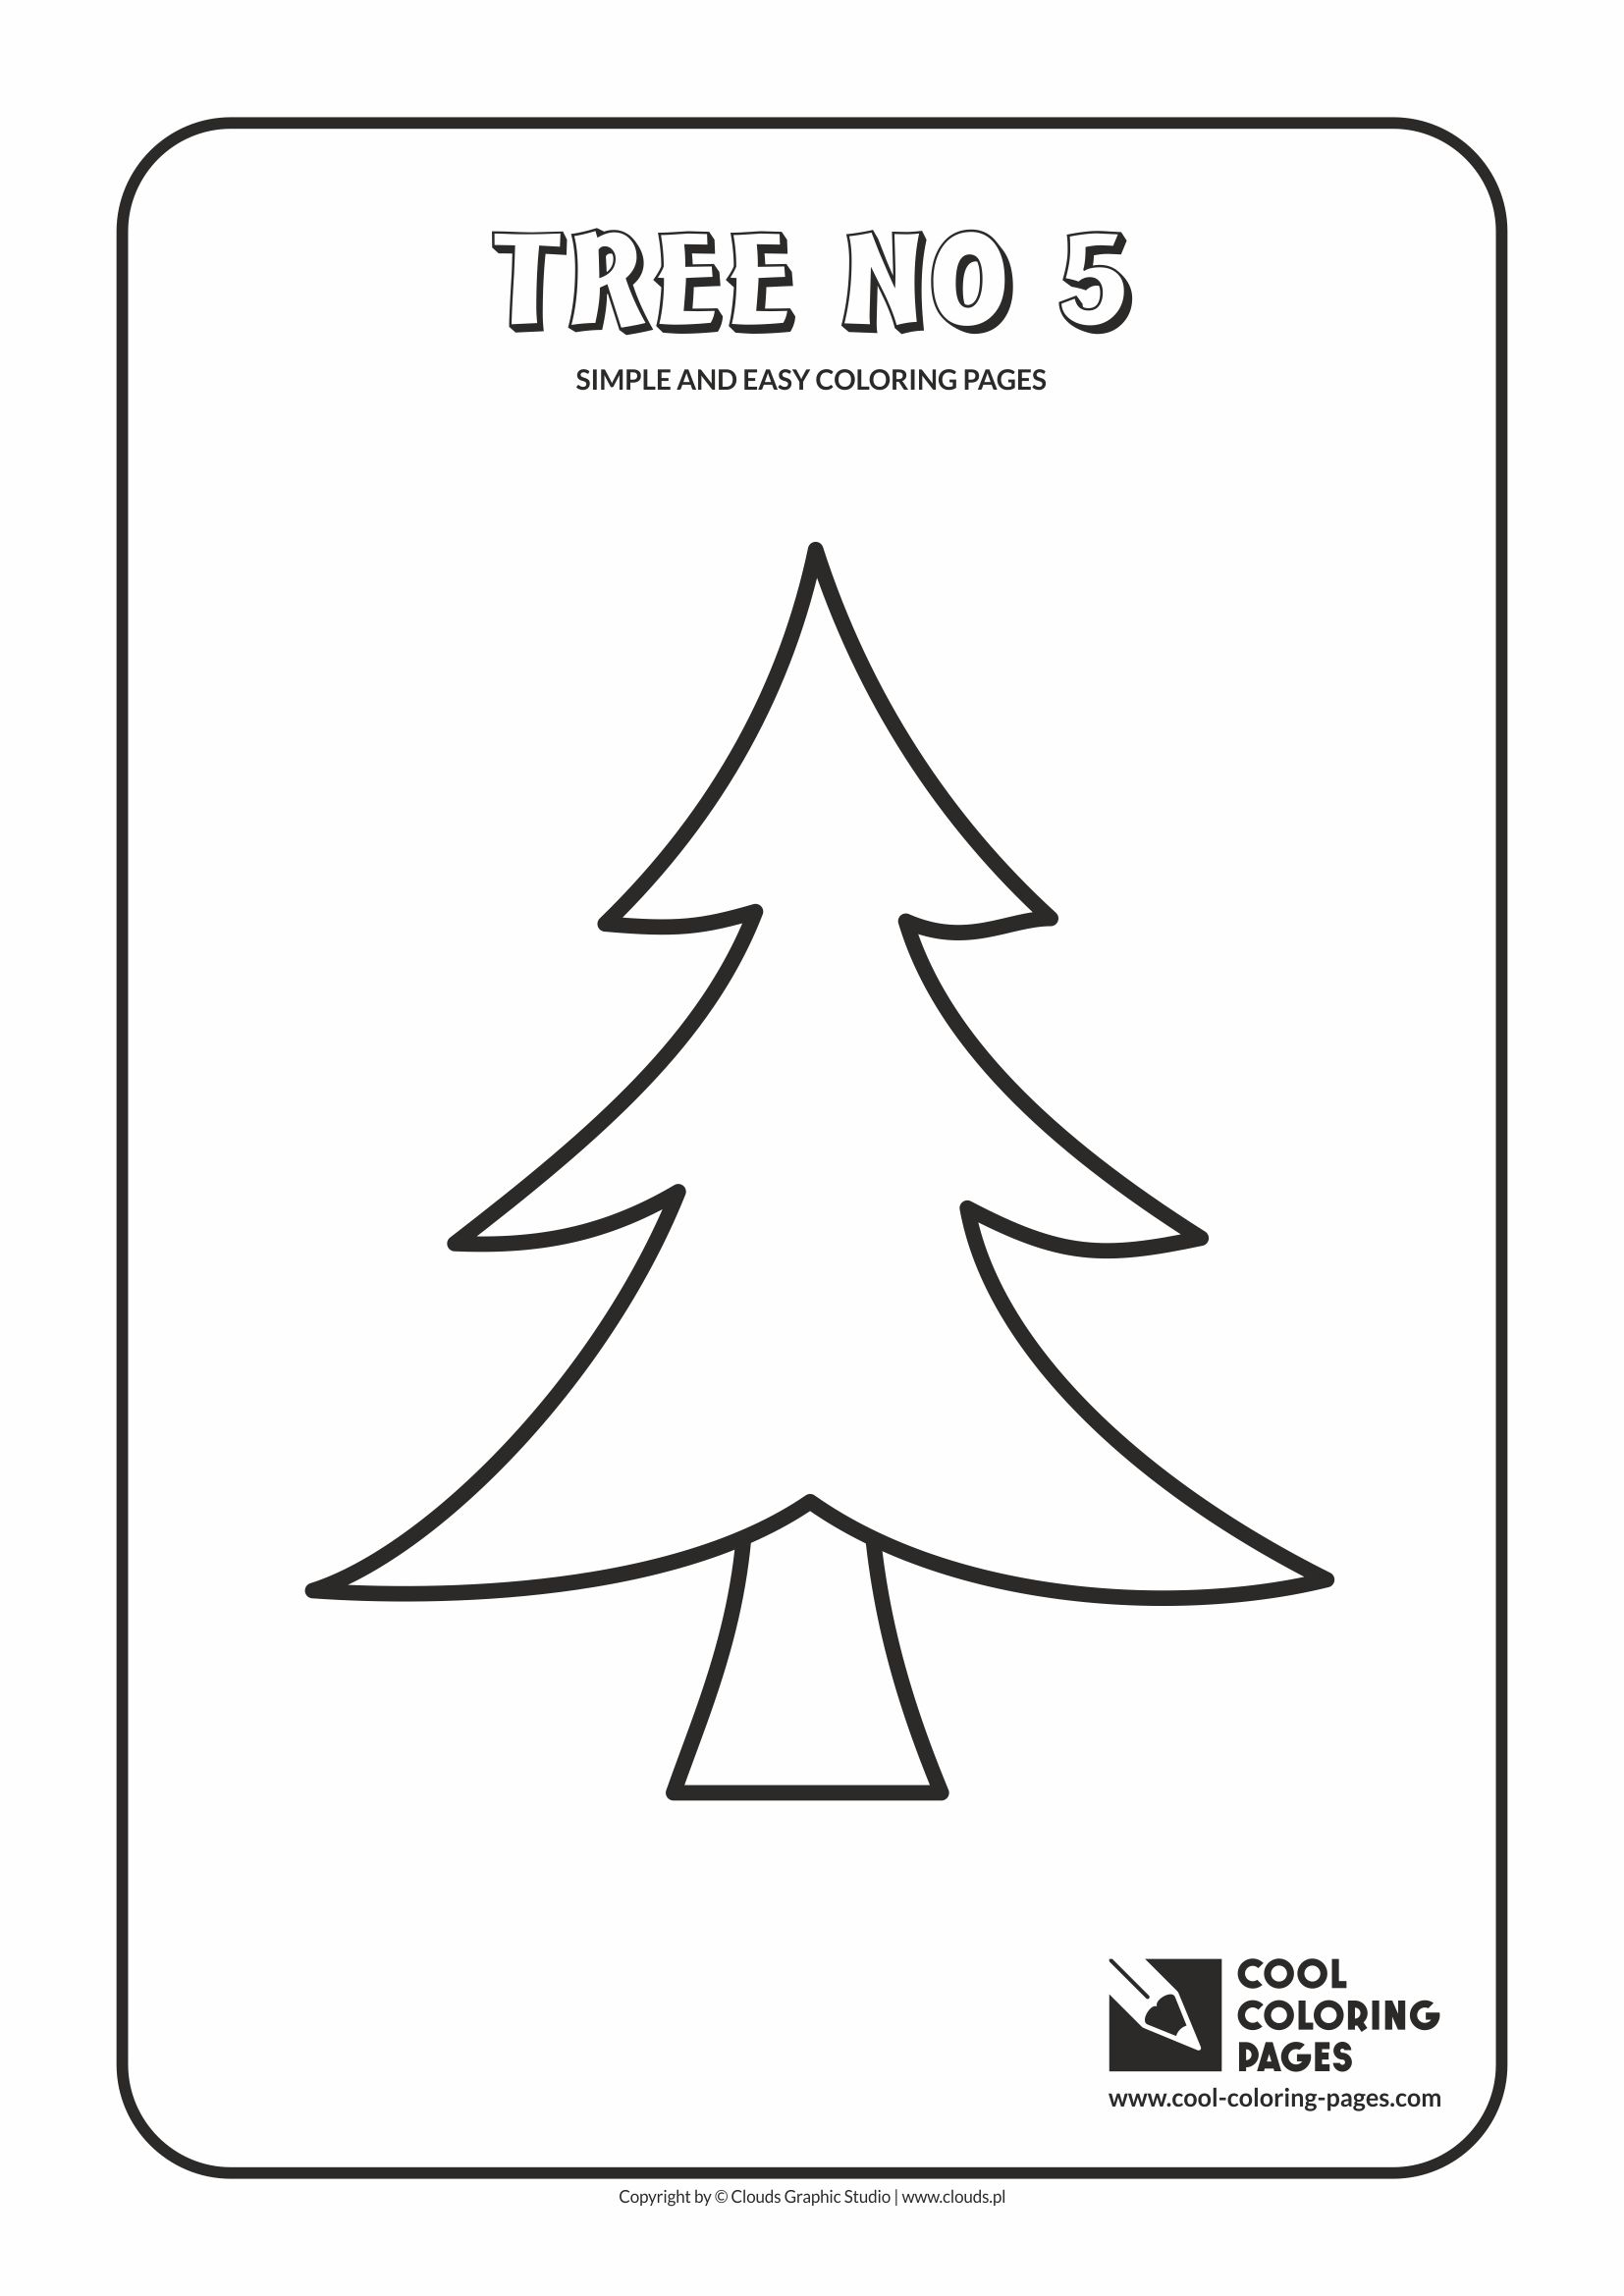 Simple and easy coloring pages for toddlers - Tree no 5